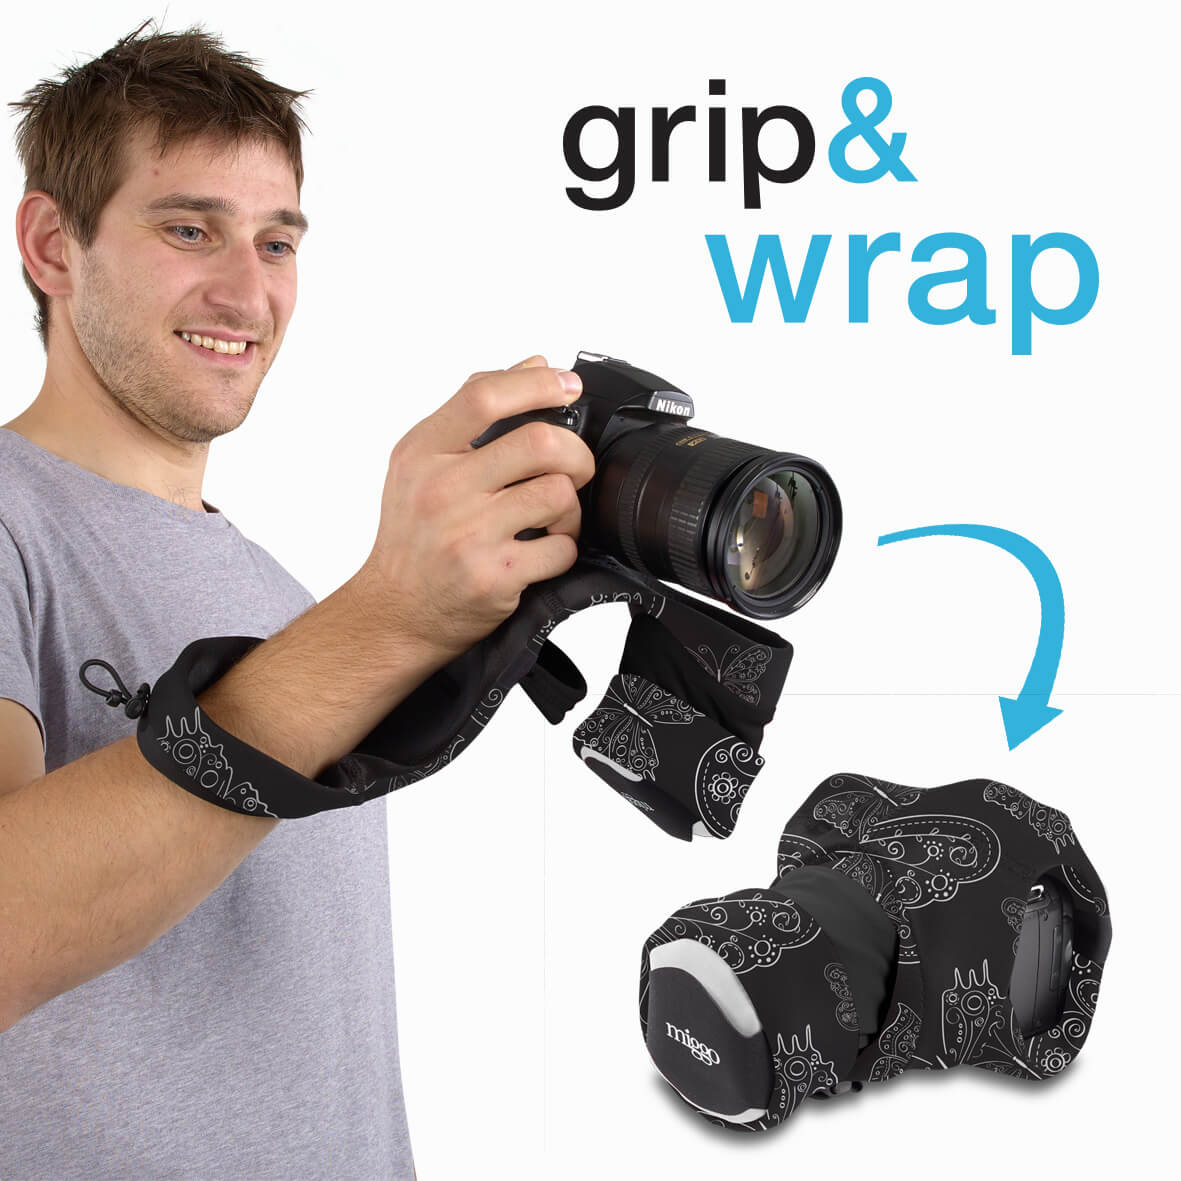 Protective Case with Grip Gri p and Wrap for DSLR, Black/Whi